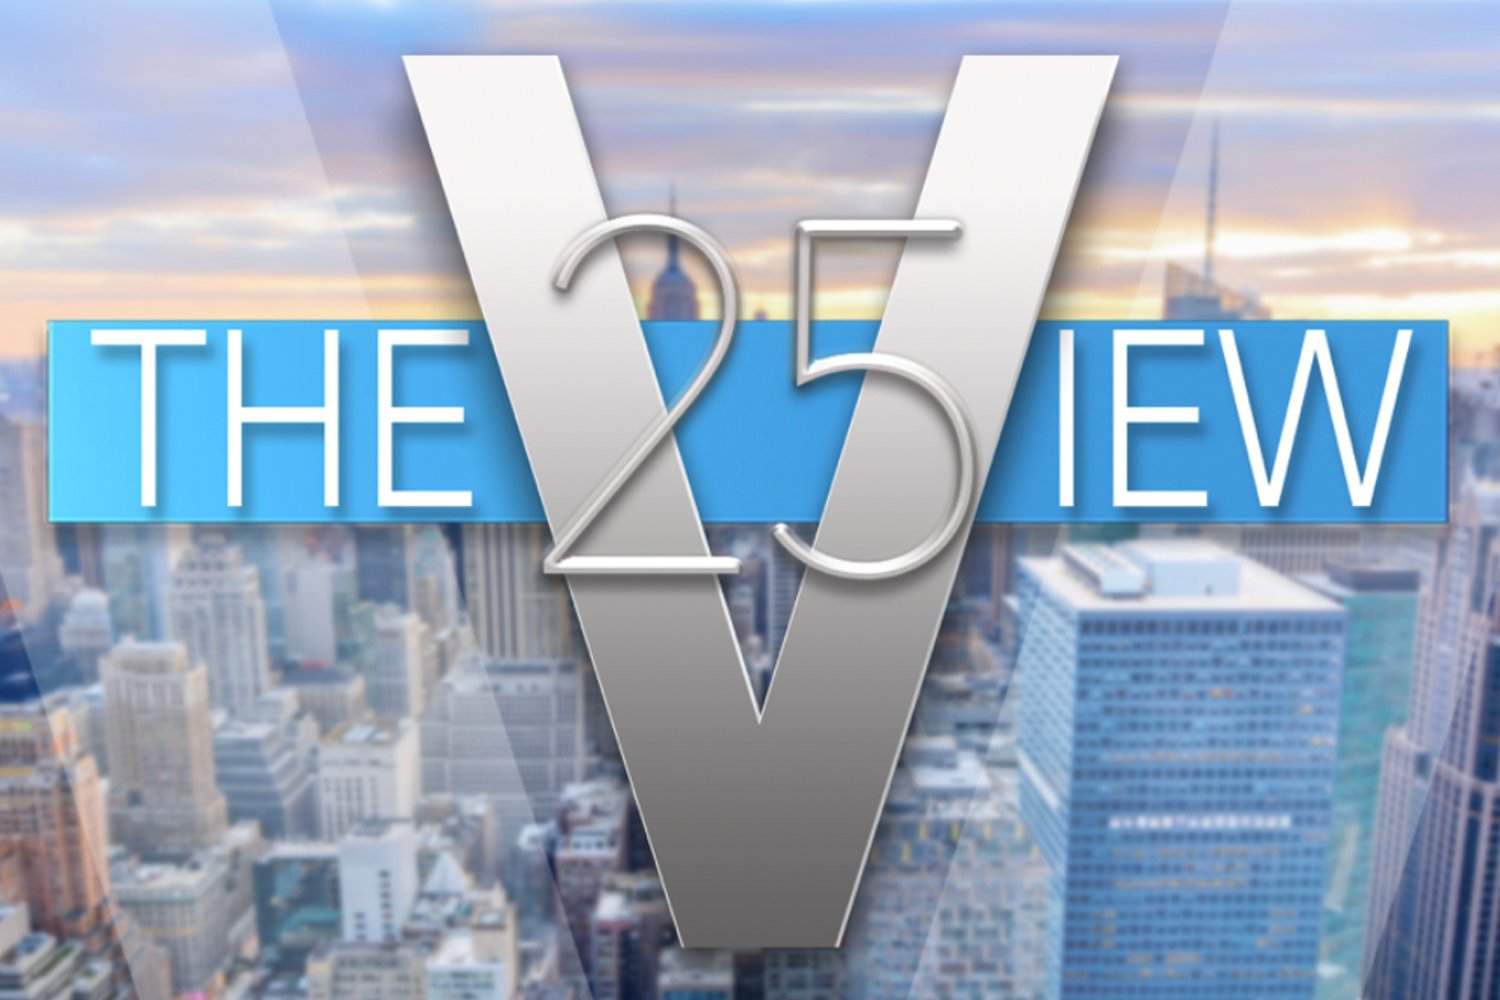 'The View' logo with a 25 in the middle